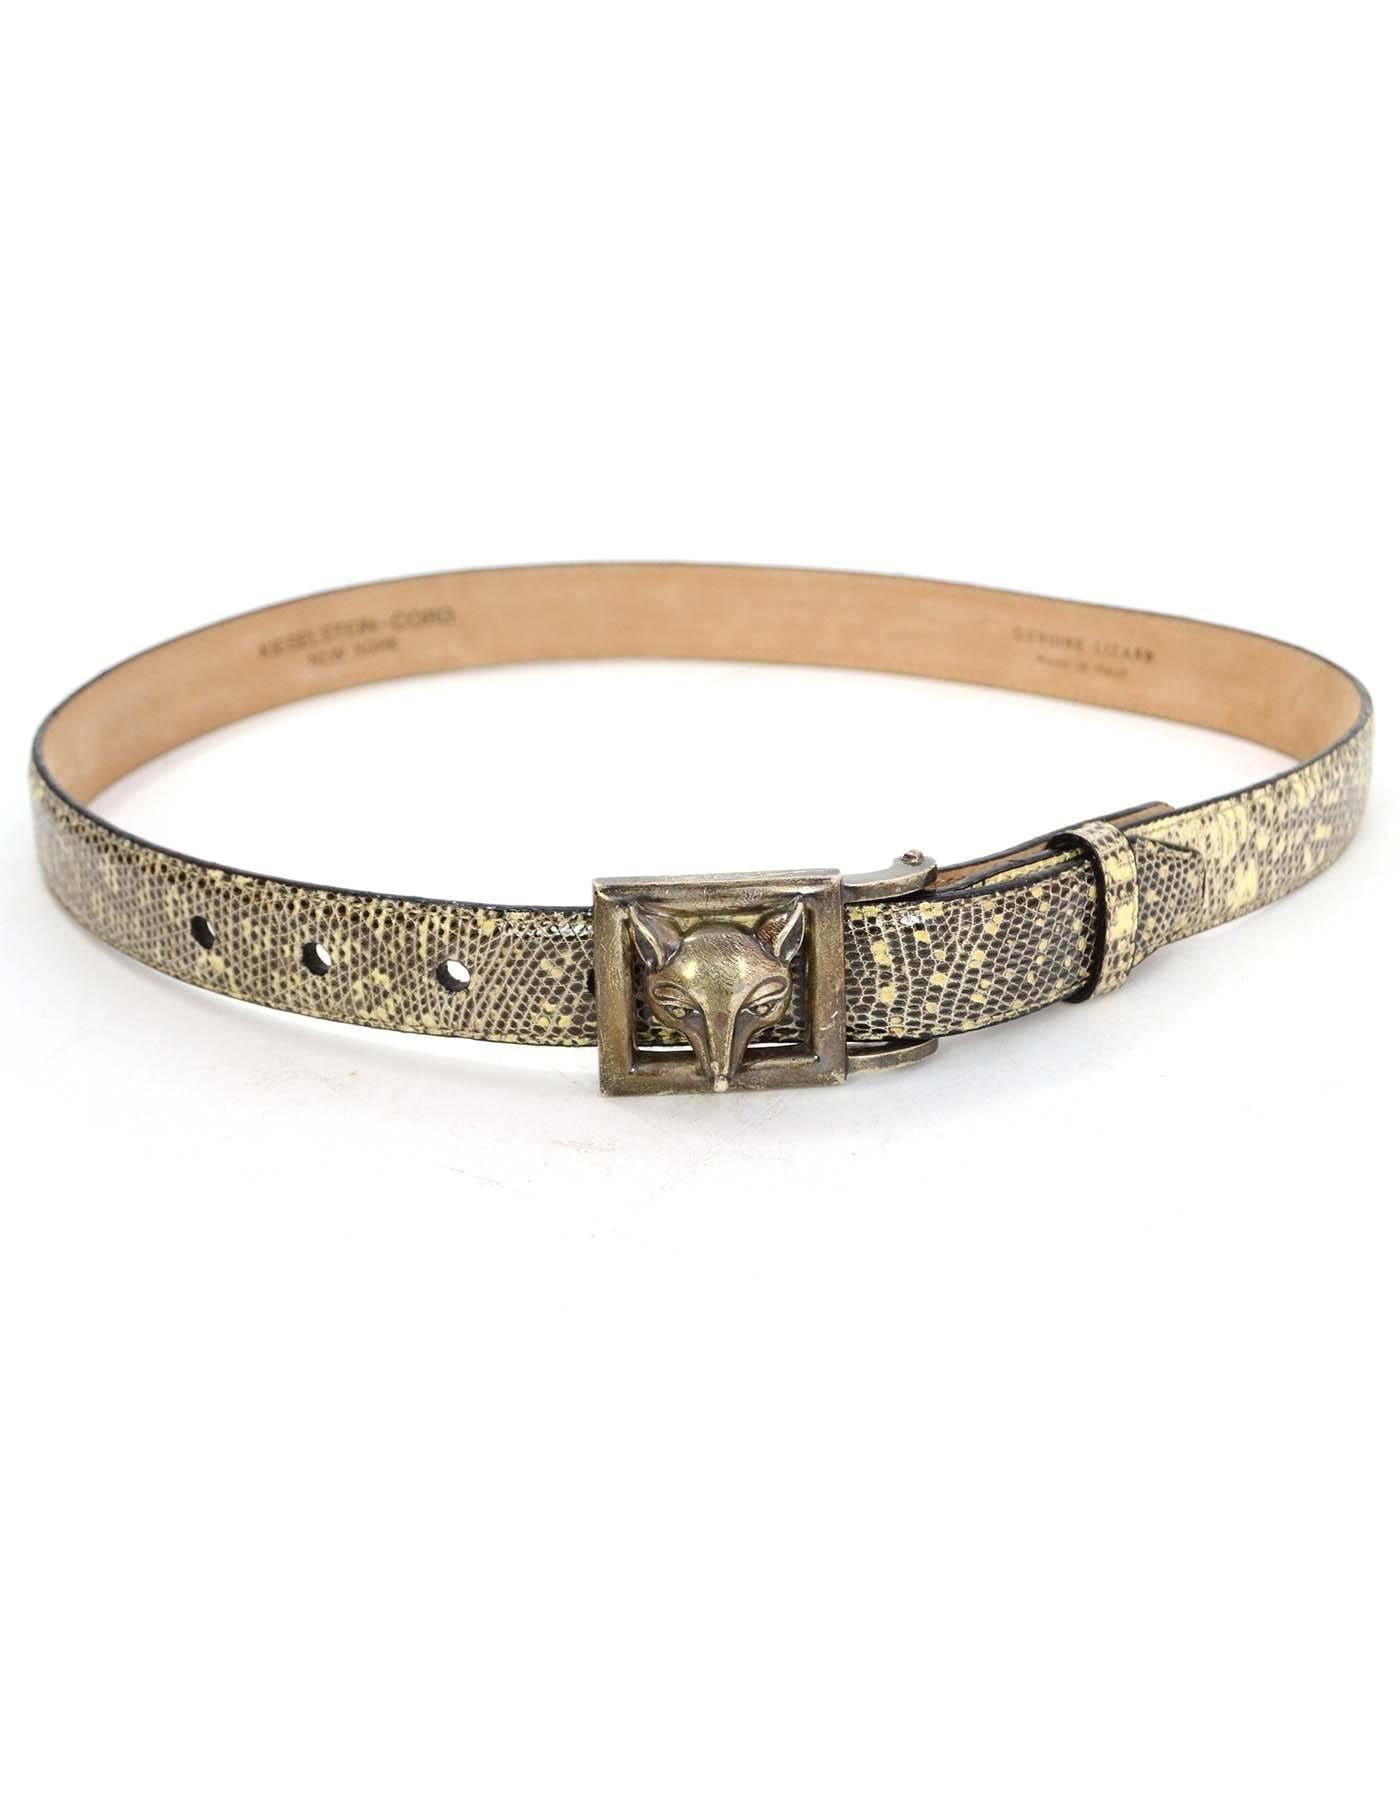 Kieselstein-Cord Lizard Skin Belt Strap 
**Note: Does NOT include belt buckle**
Made In: Italy
Color: Black and cream
Hardware: Black and silvertone
Materials: Lizard skin
Closure/Opening: Double snap button closure
Stamp: Kieselstein-Cord